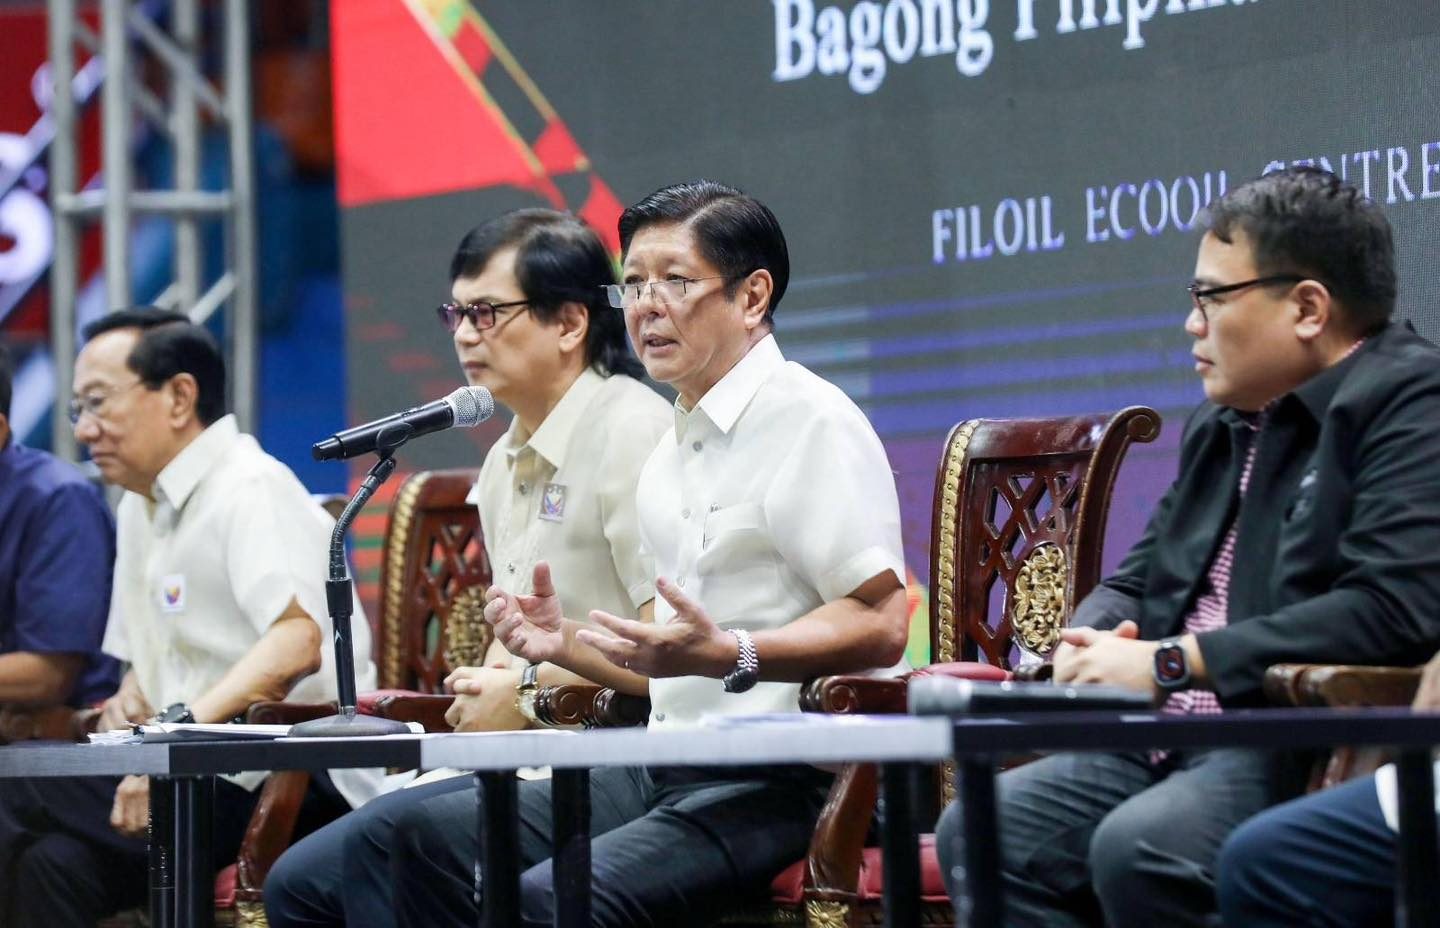 Marcos’ traffic town hall a mixed bag for transport groups snubbed by Malacañang